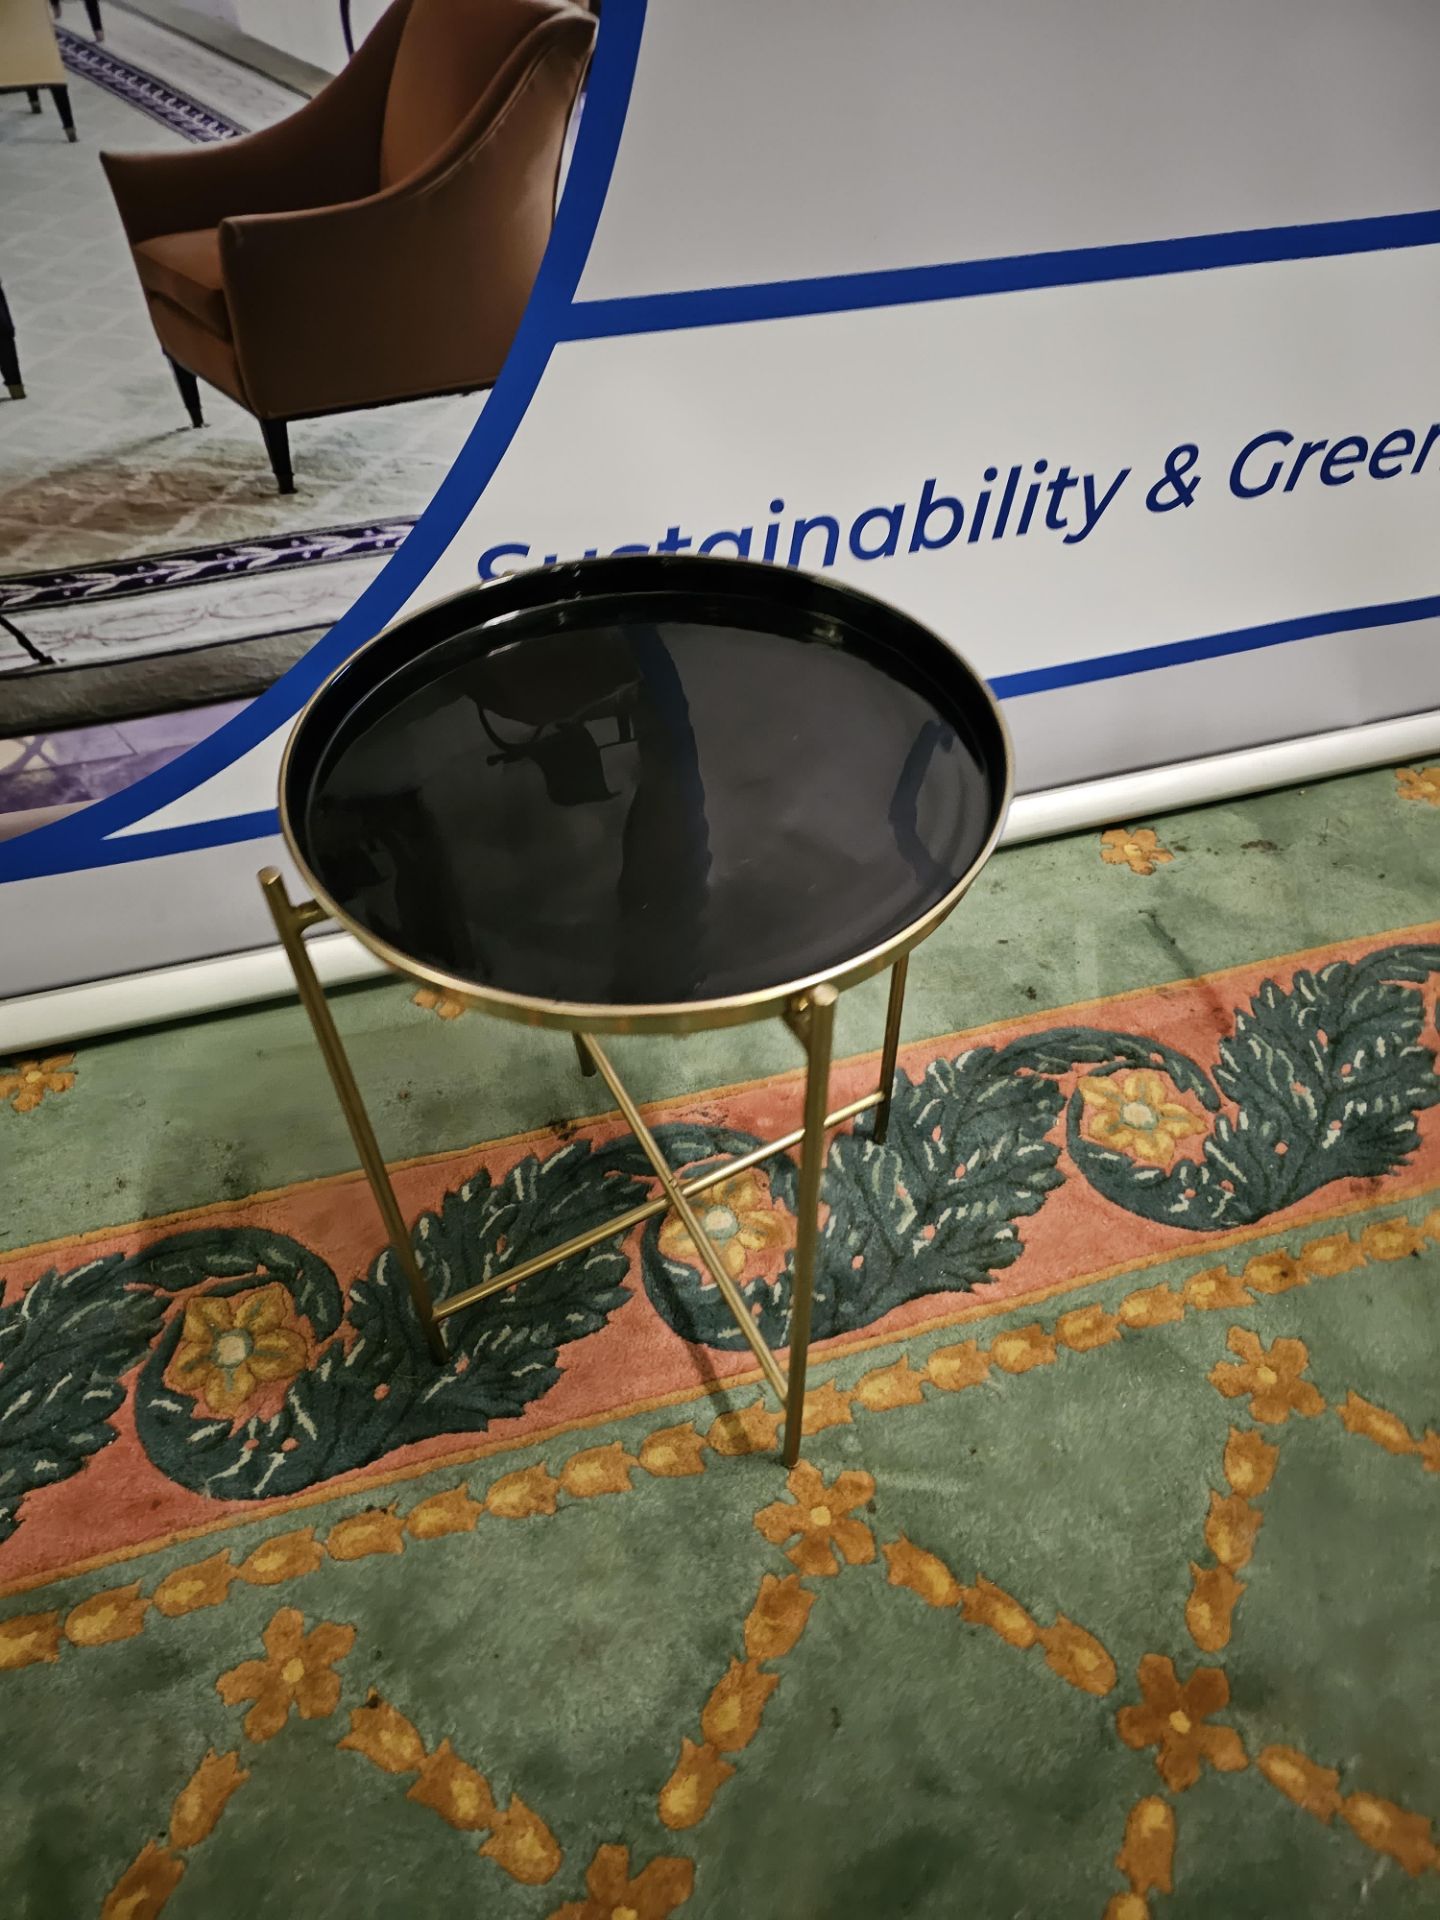 Gallery round metal tray table finished in brass and black Whether you're looking for an accent